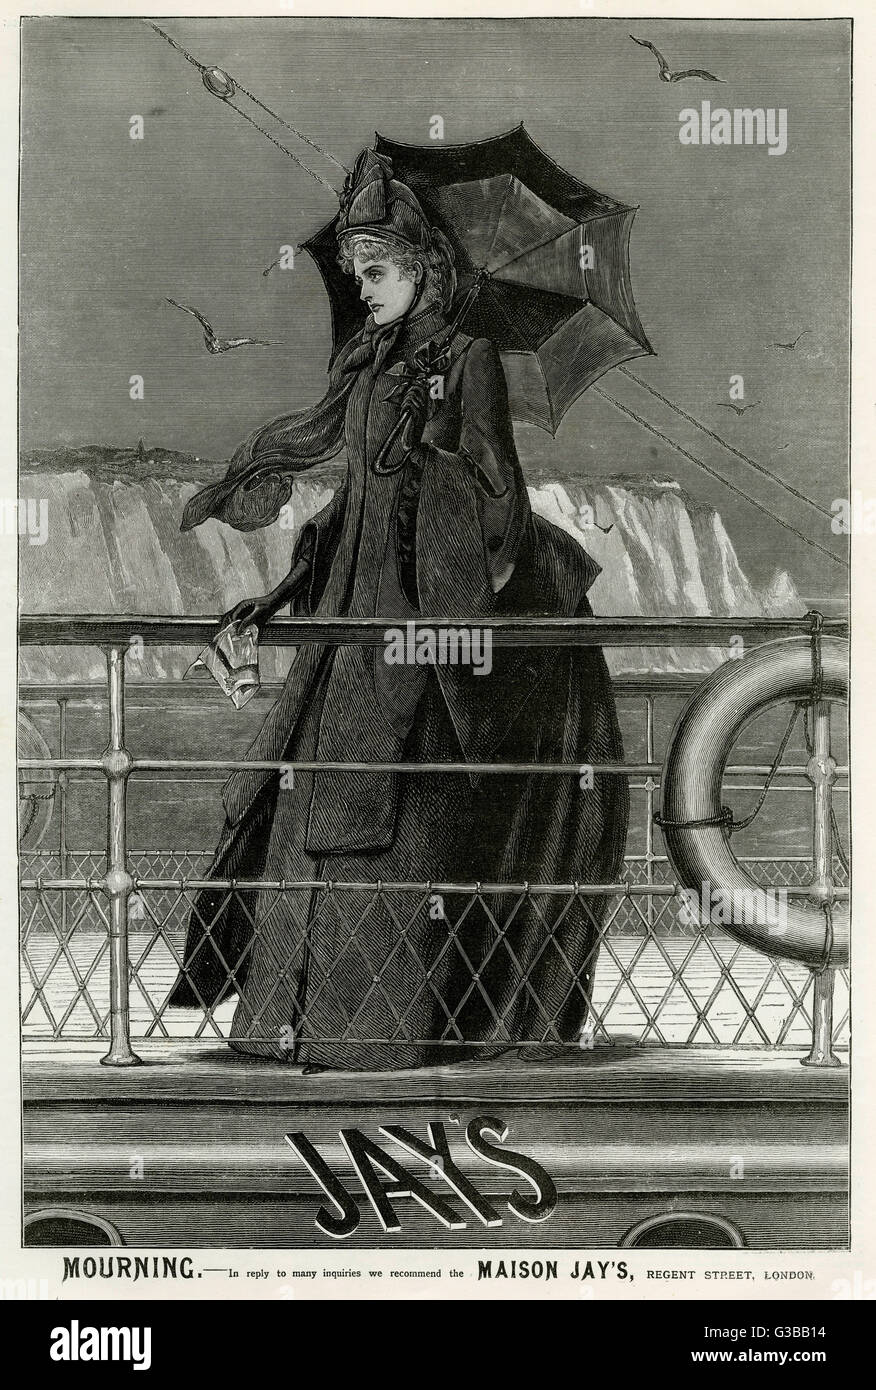 A windswept, forlorn young  widow stands at the ship's  railings - the white cliffs of  Dover behind her. Fashionable mourning dress is courtesy of  Maison Jays, Regent Street.      Date: 1888 Stock Photo